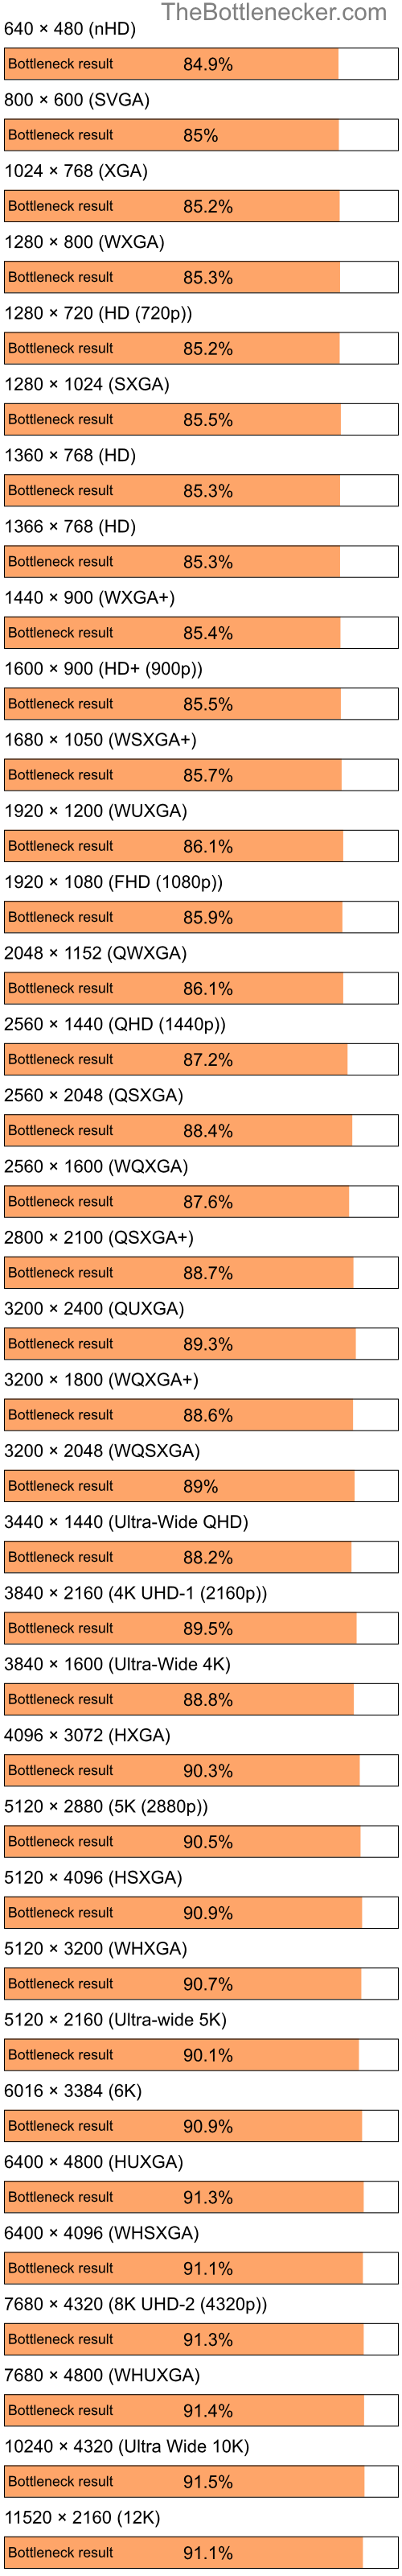 Bottleneck results by resolution for Intel Pentium 4 and NVIDIA GeForce Go 6150 in Graphic Card Intense Tasks